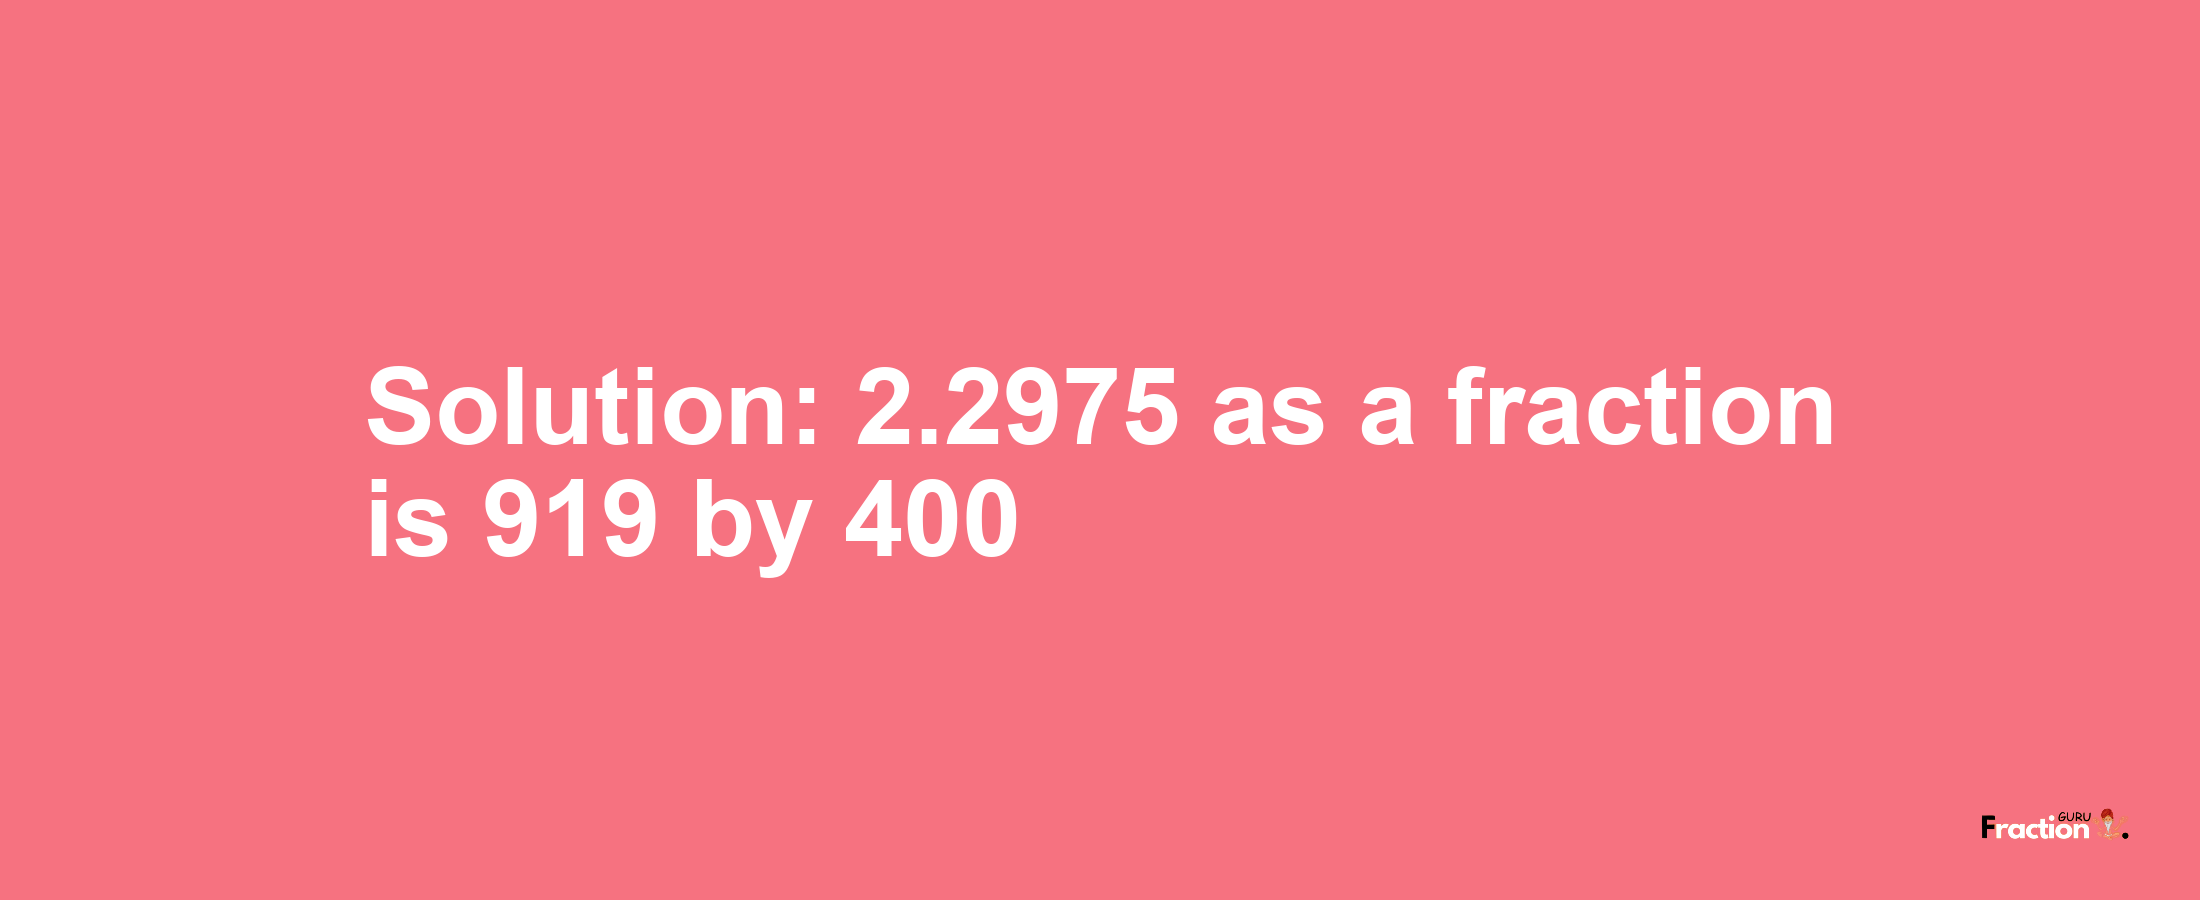 Solution:2.2975 as a fraction is 919/400